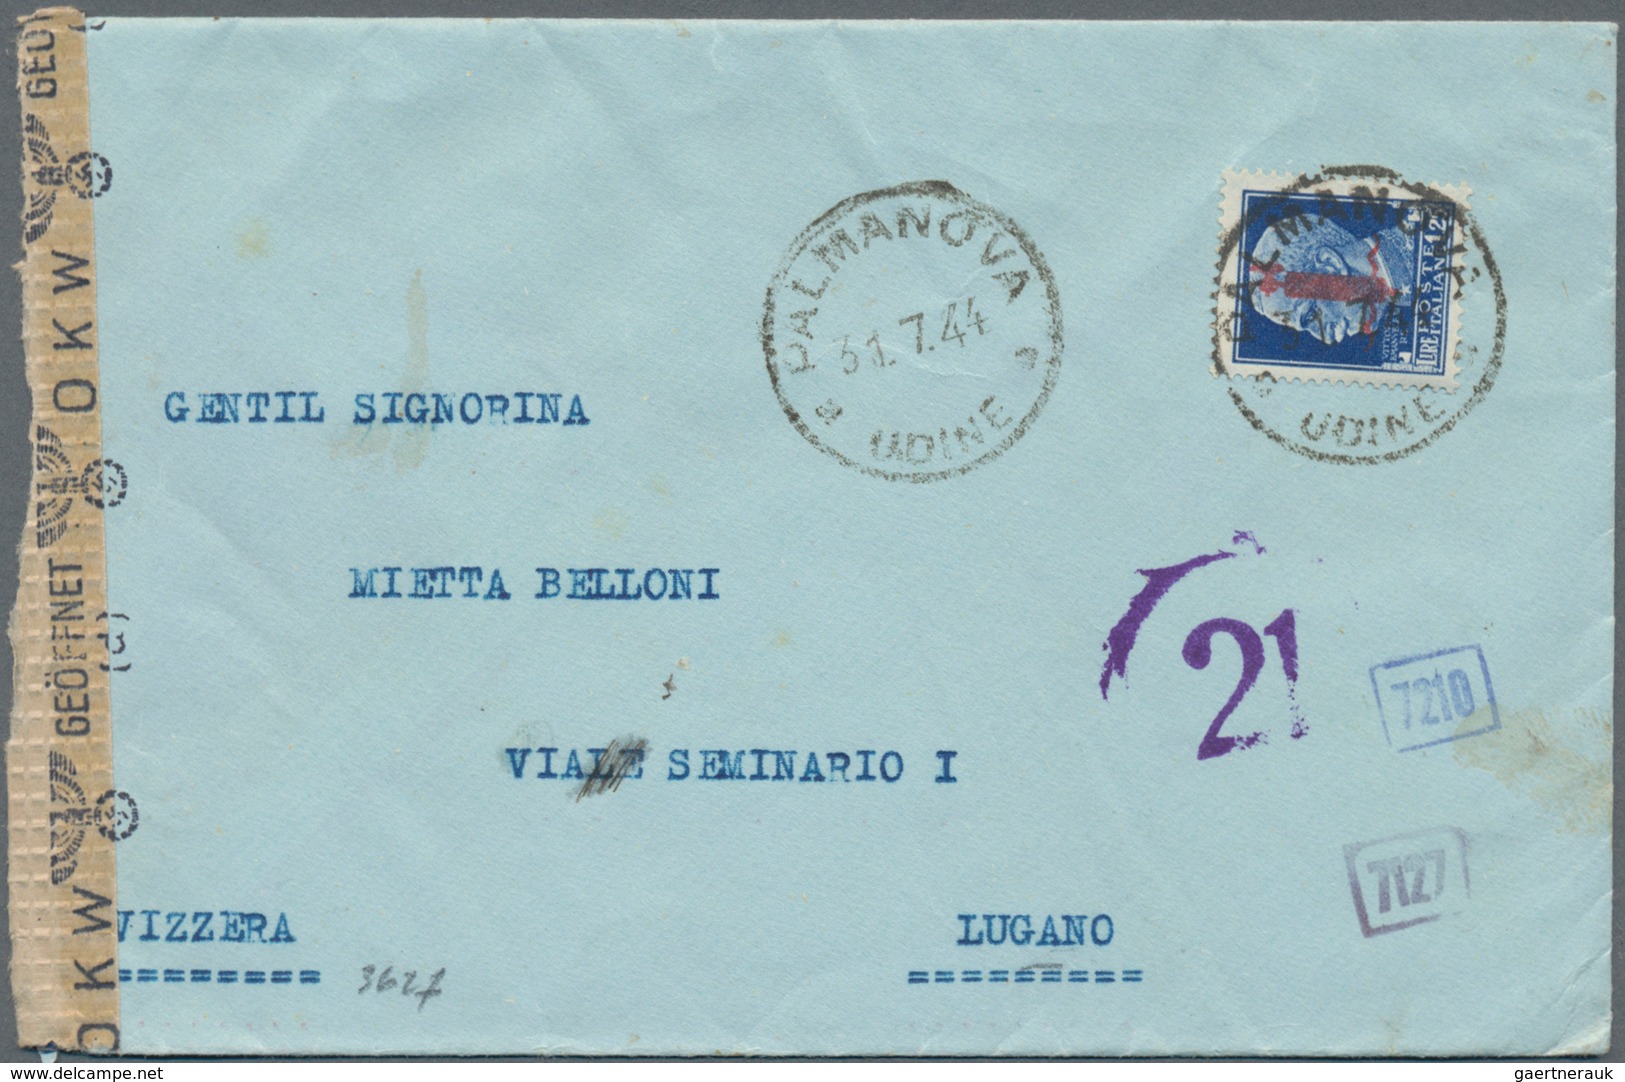 Italien: 1867/2012 holding of ca. 260 letters, cards, picture-postcards, military cards and used pos